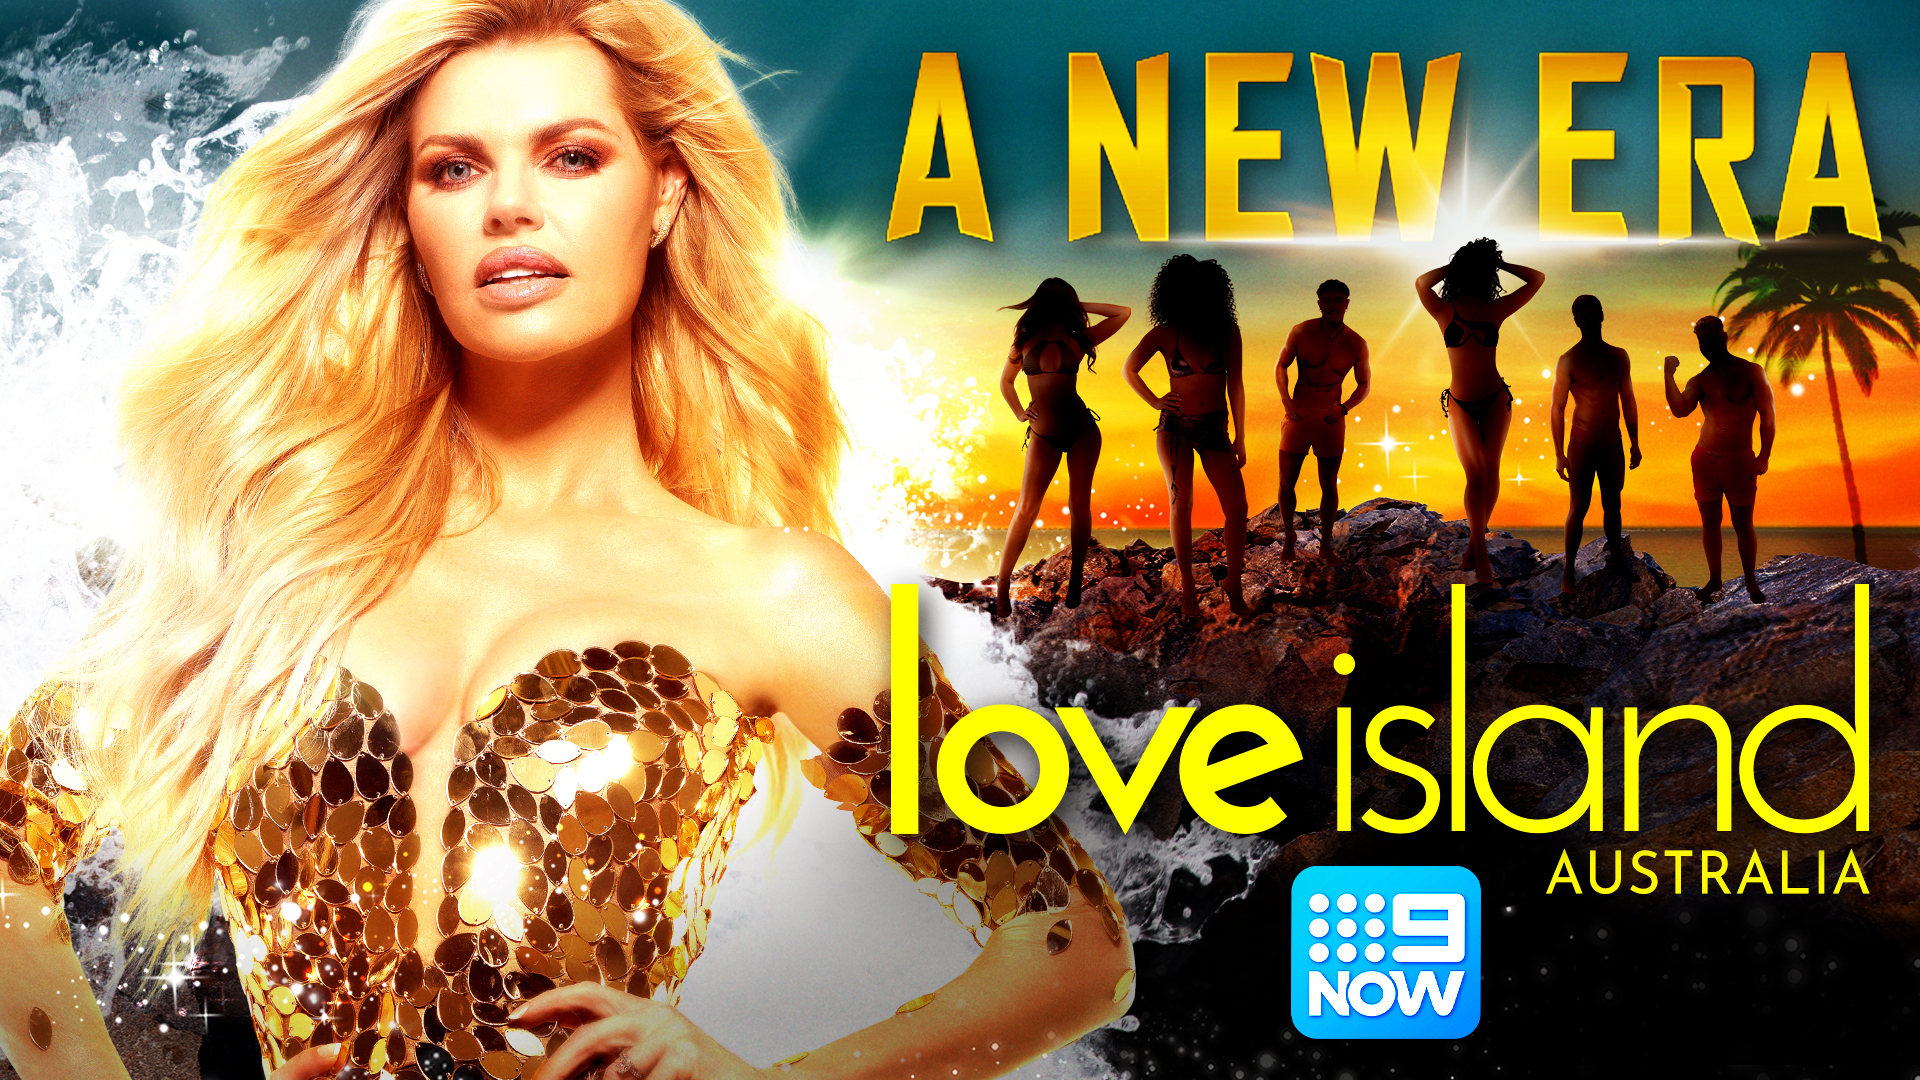 Put the power of love to the test with Australia's hottest reality